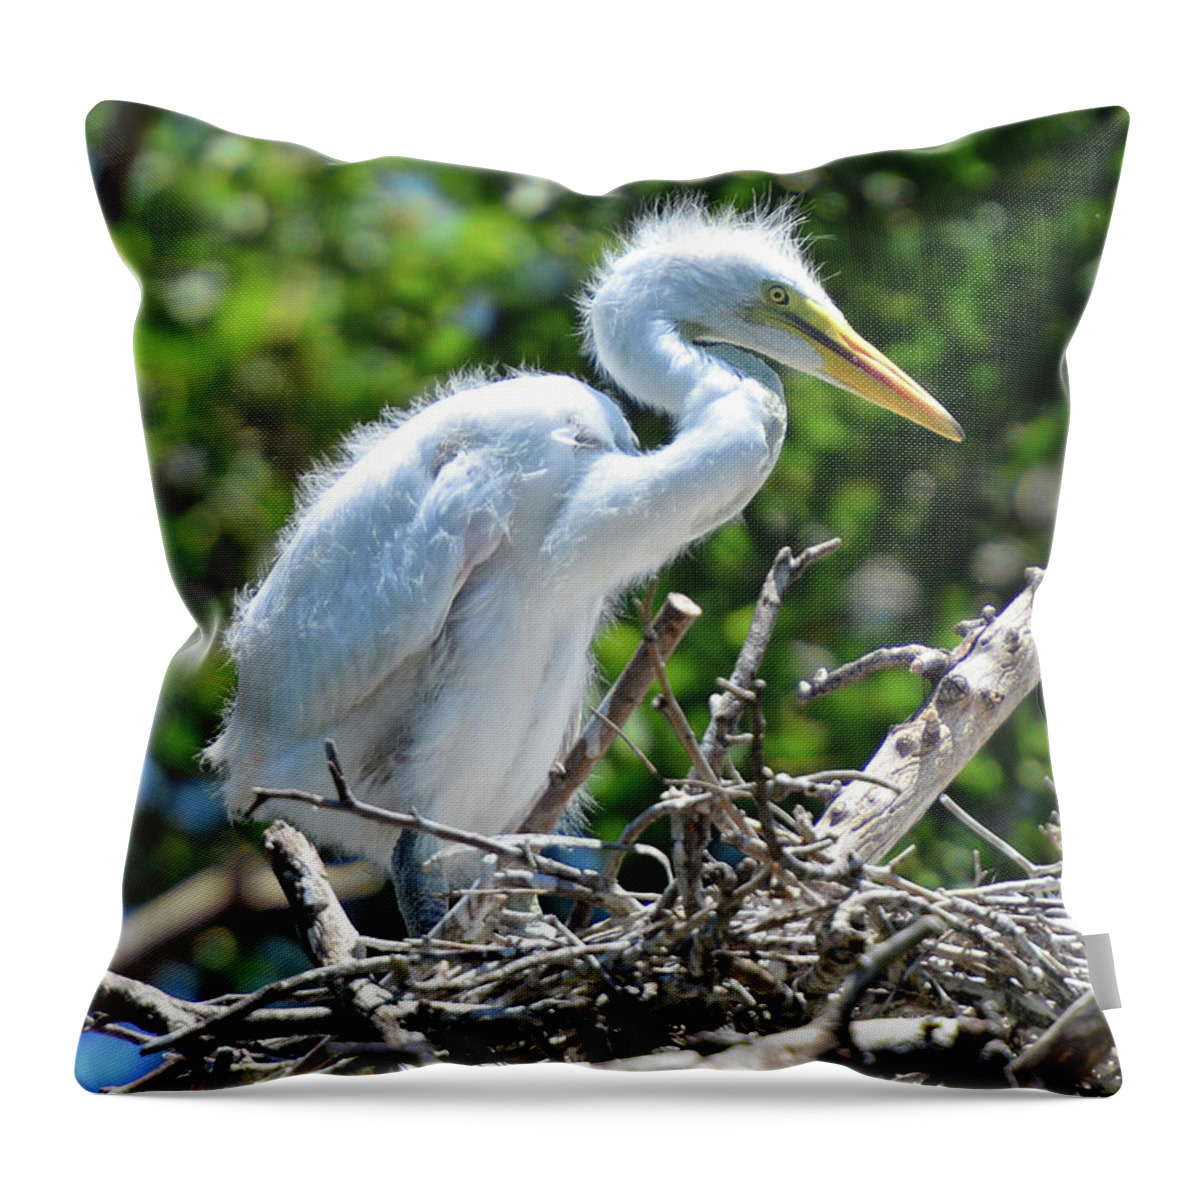 Animal Themes Throw Pillow featuring the photograph An Infant Egret In The Nest by Jeff R Clow